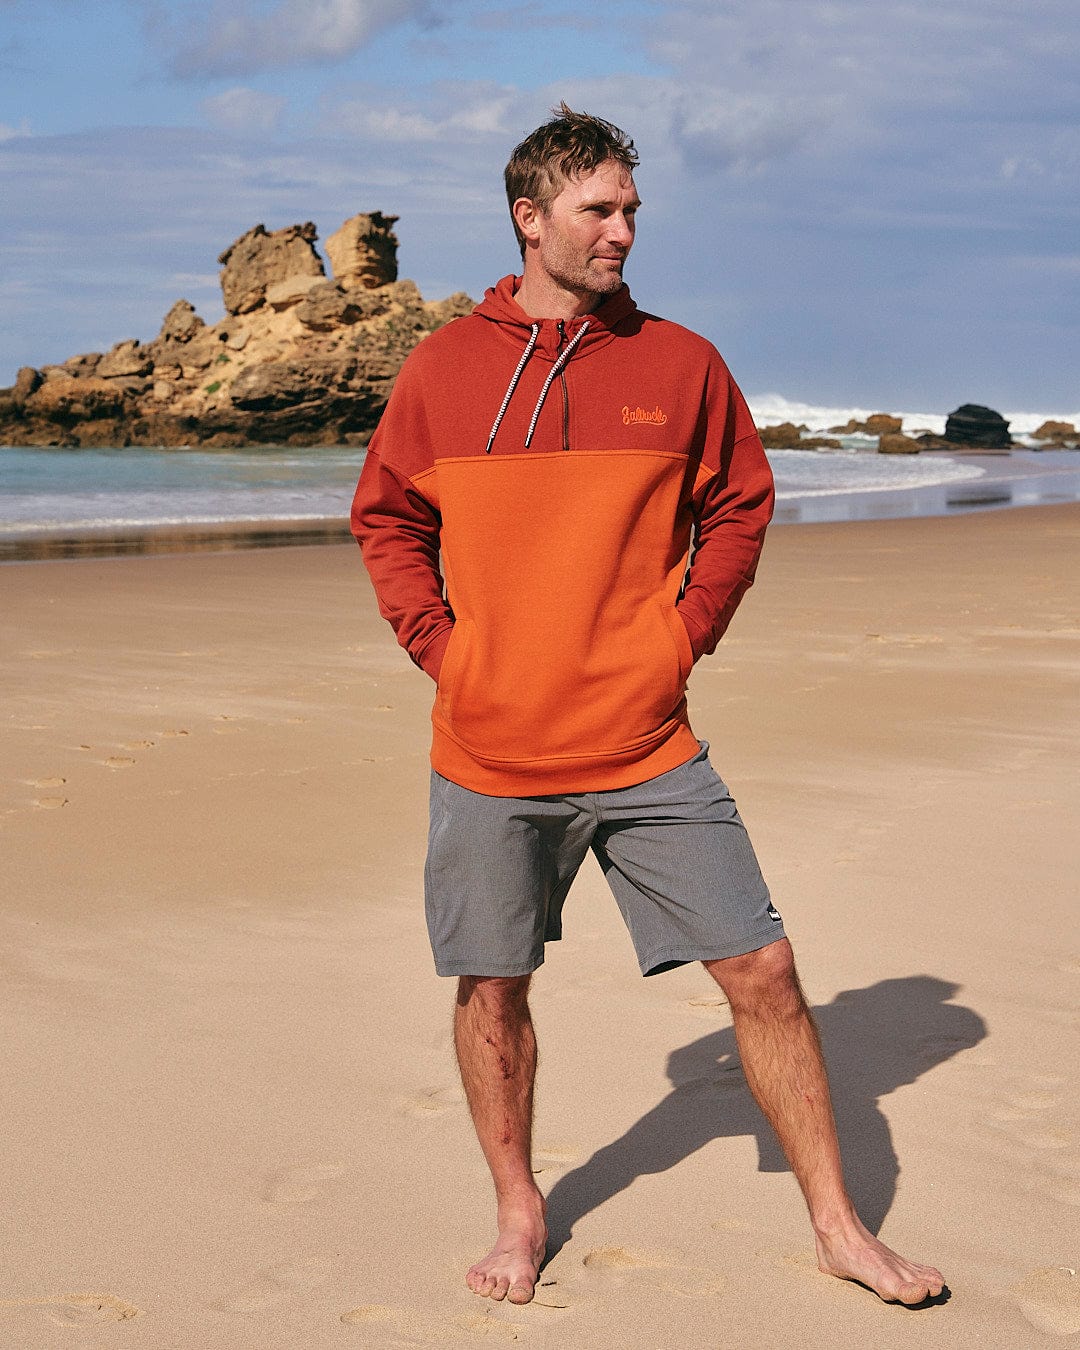 A man in a Saltrock Speed Embroidery - Mens 1/4 Neck Zip - Red sweatshirt standing on a beach.